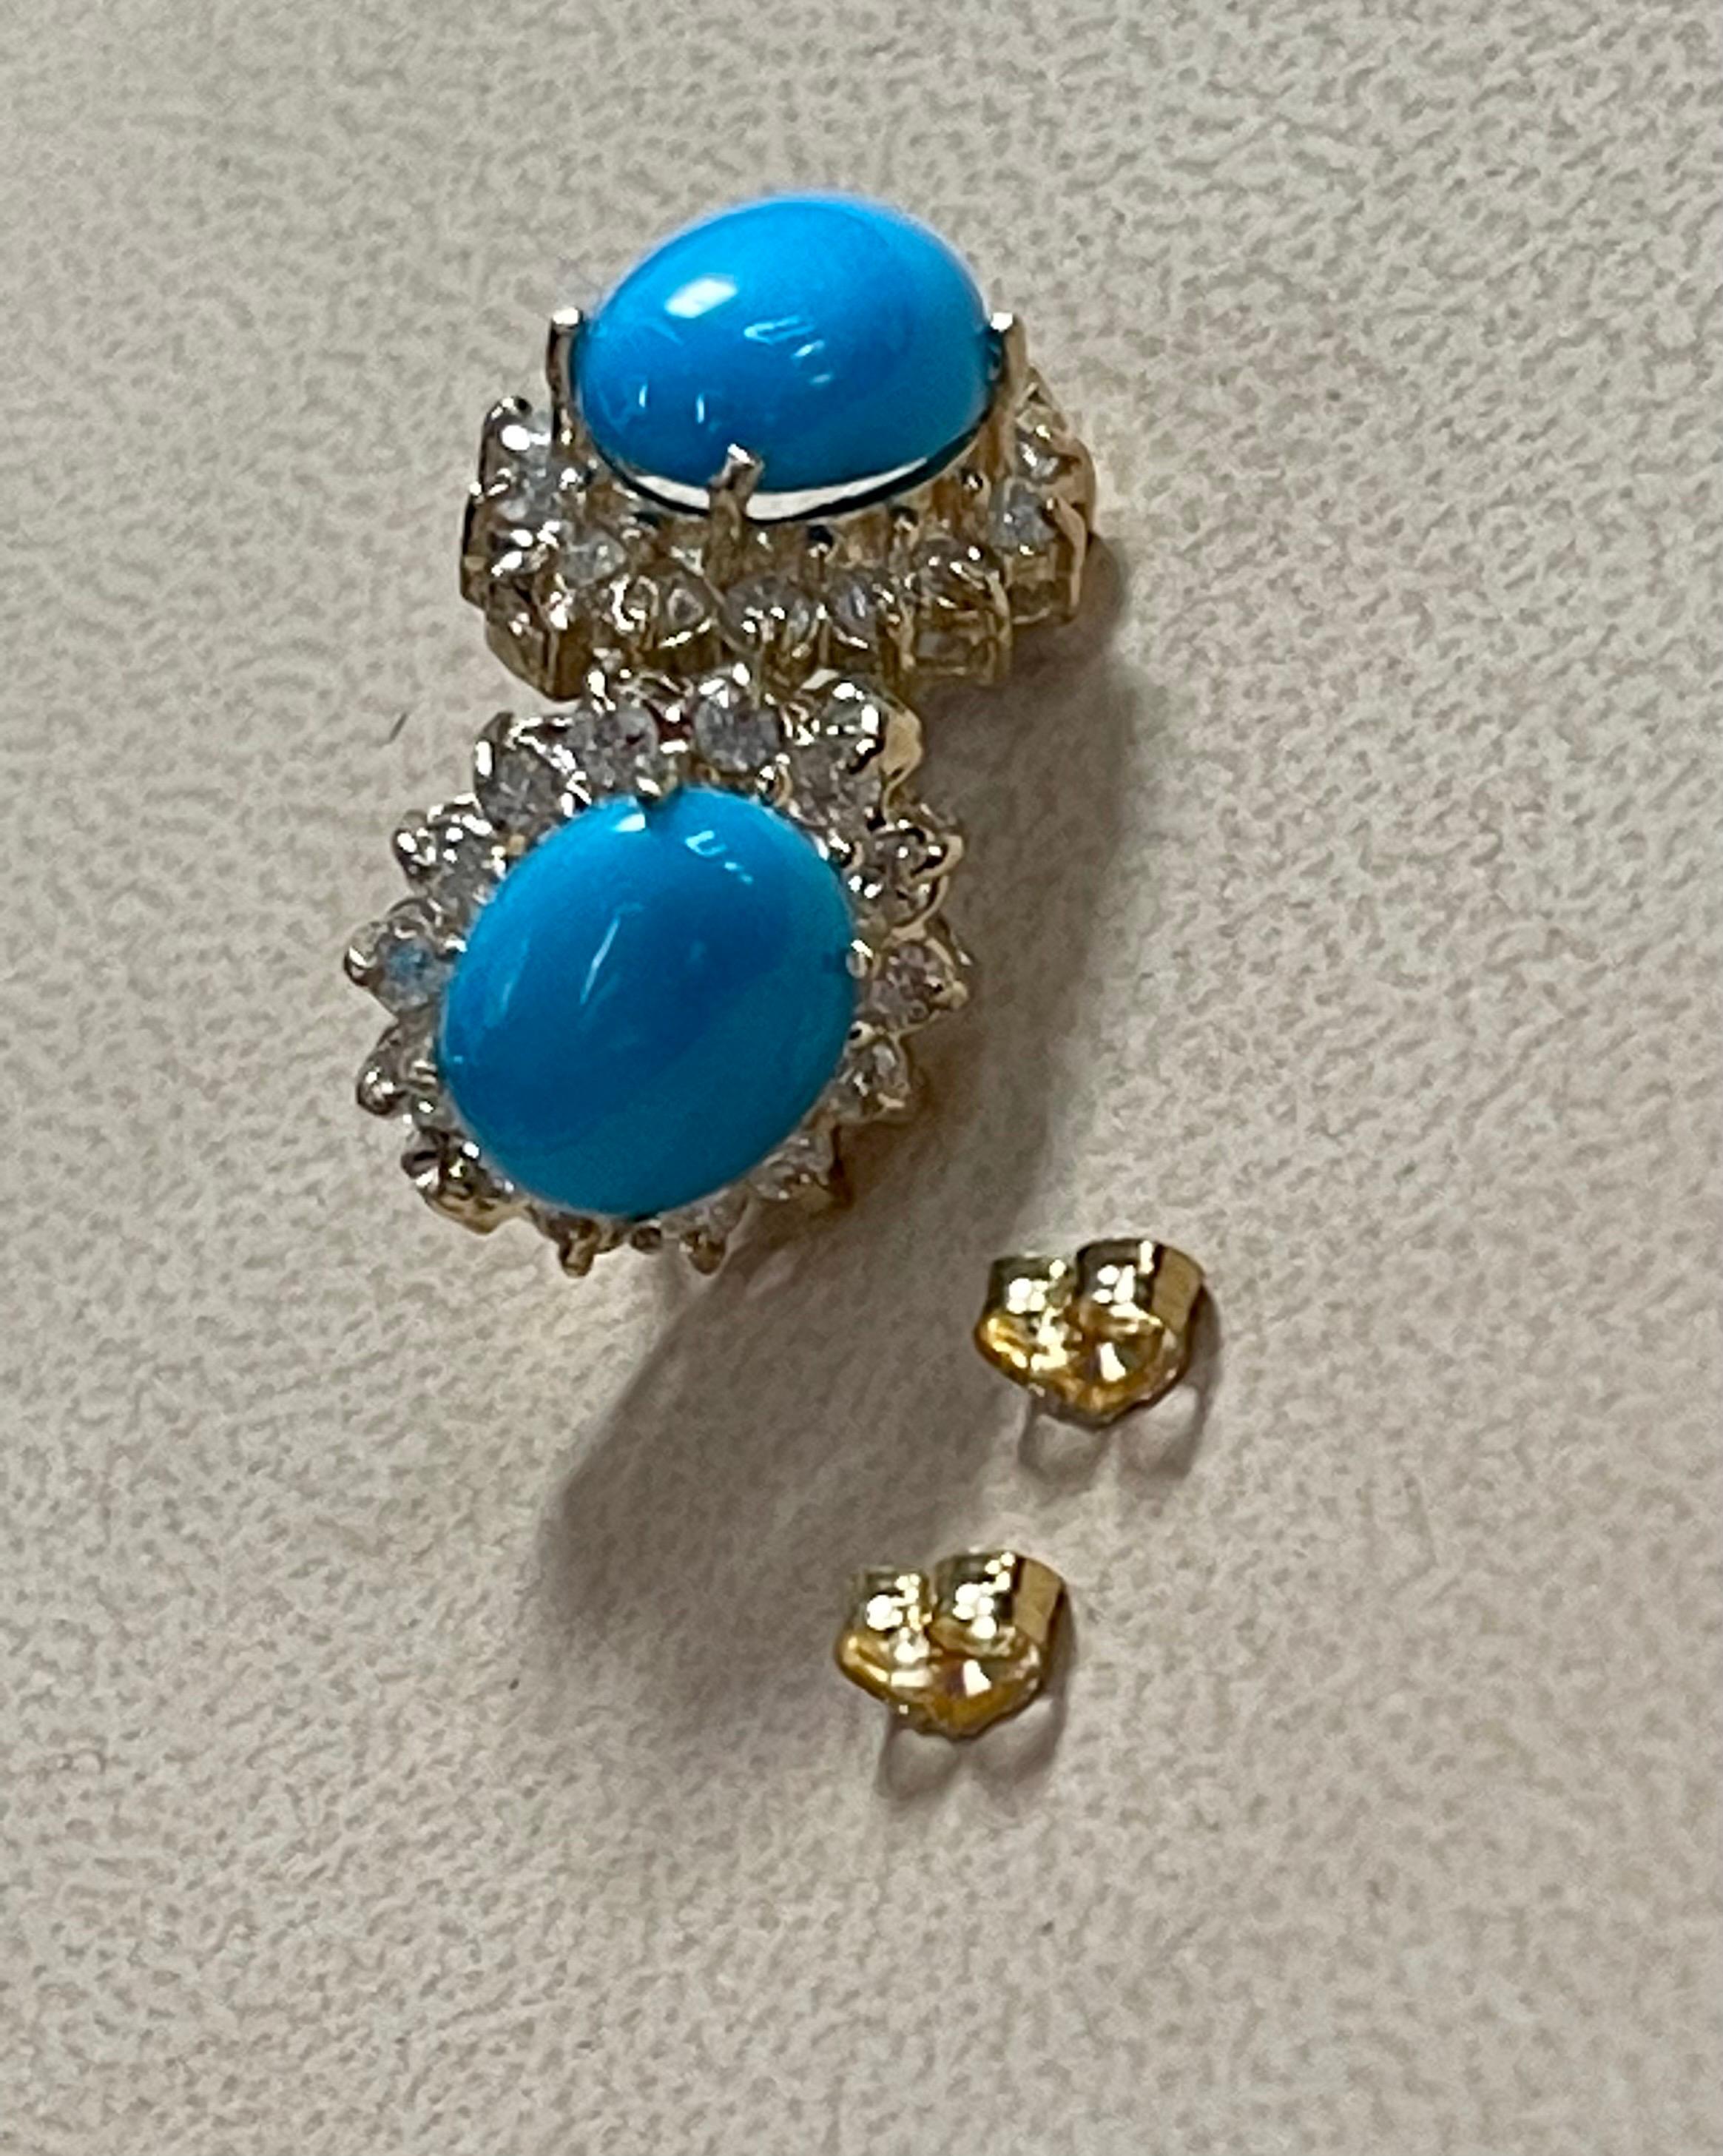 8 Ct Oval Sleeping Beauty Turquoise 1.5ct Diamond Stud Earrings 14 K Yellow Gold In Excellent Condition For Sale In New York, NY